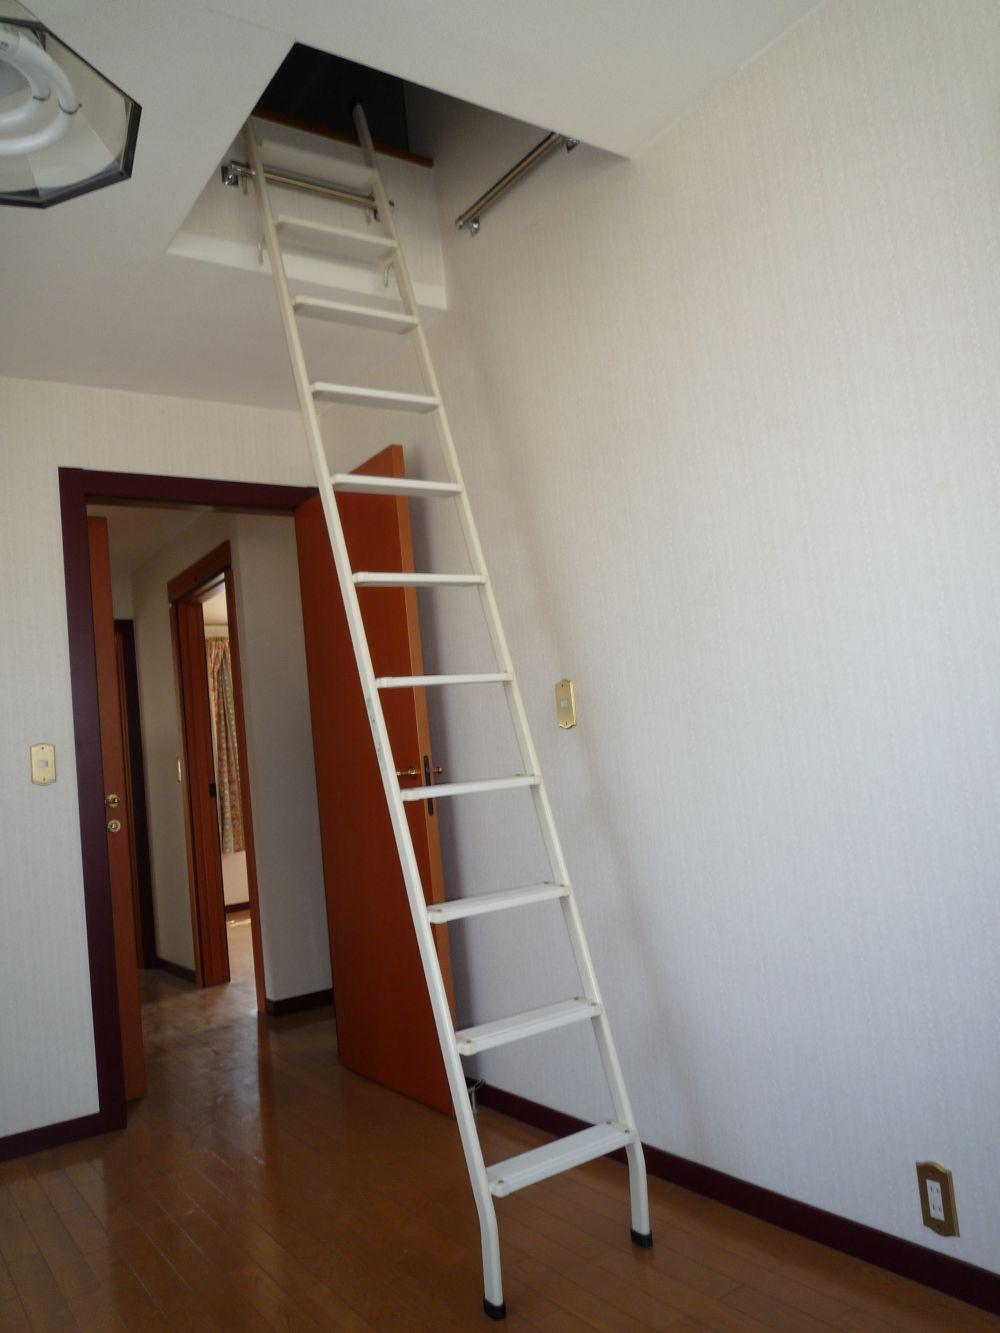 Other introspection. Ladder to the "loft"